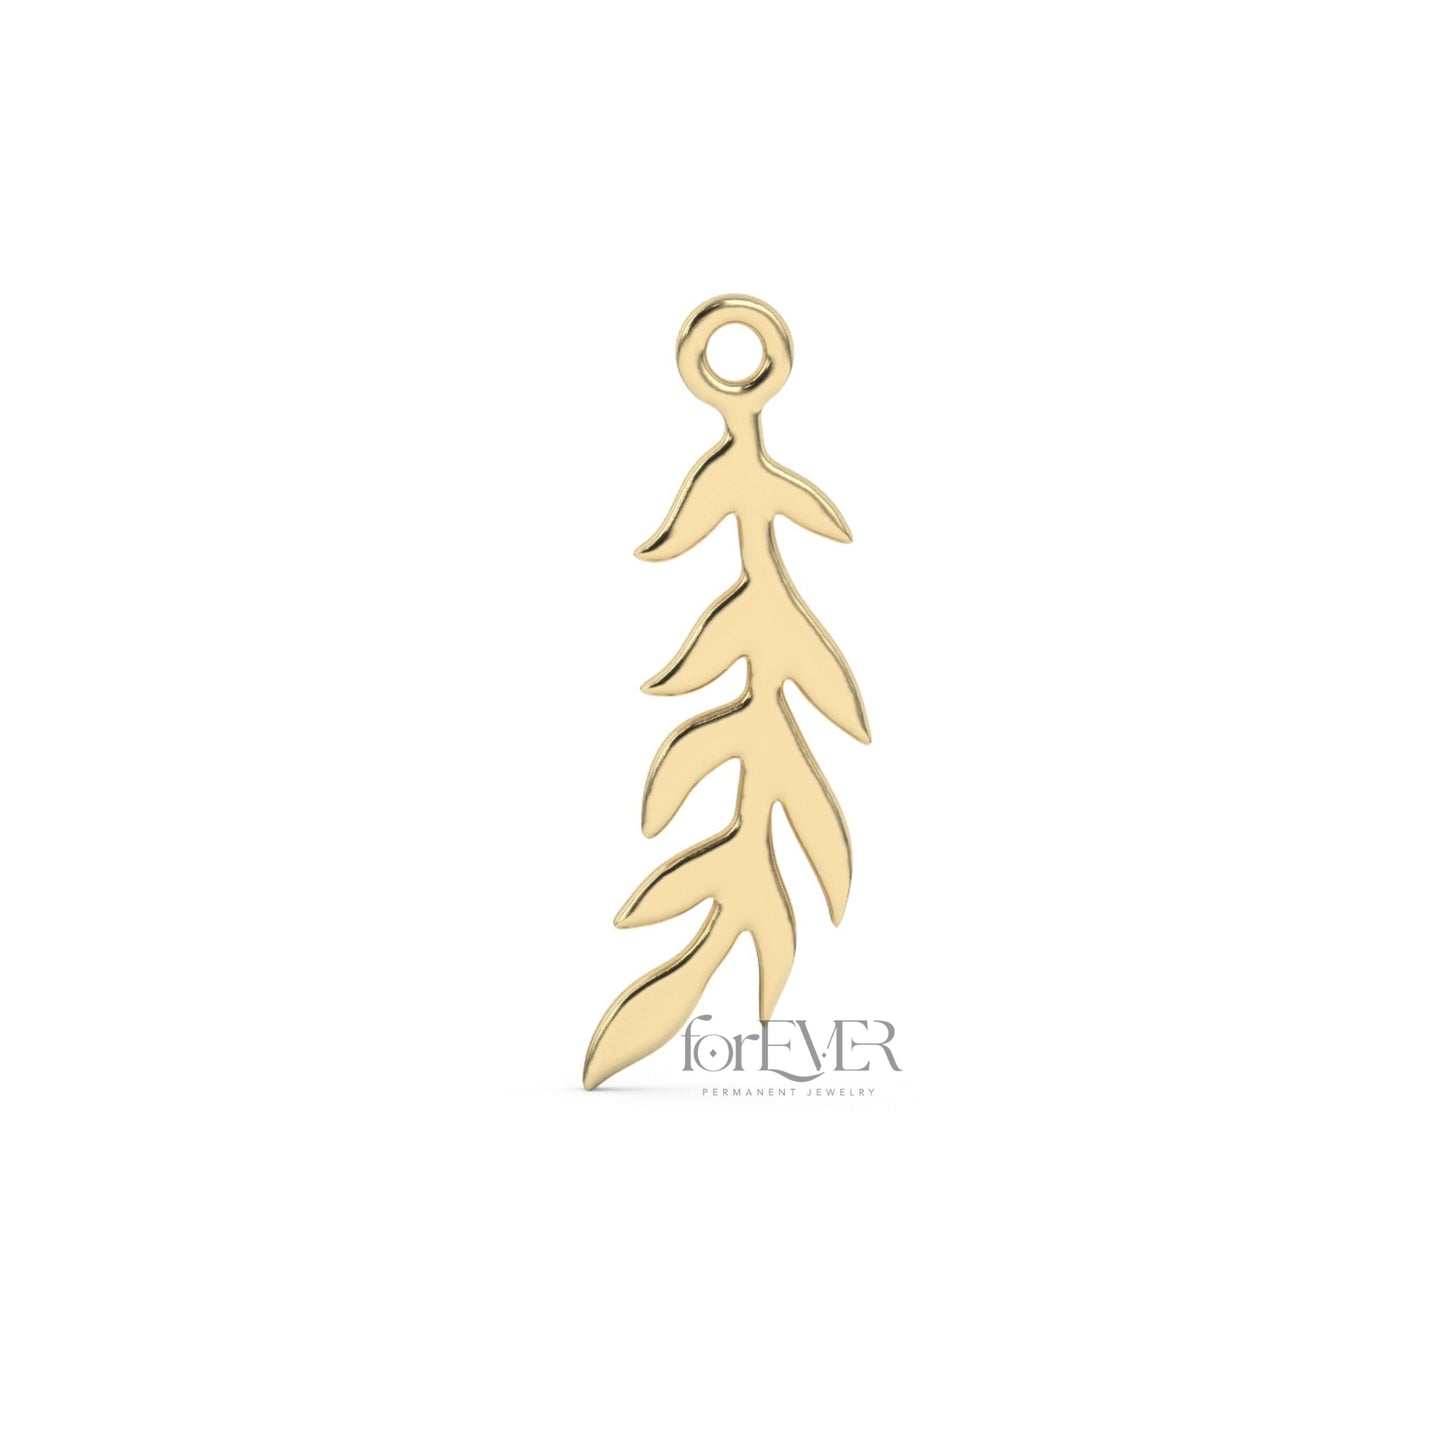 forEVER Permanent Jewelry newest 10k solid gold in the design of olive branch charm in yellow gold